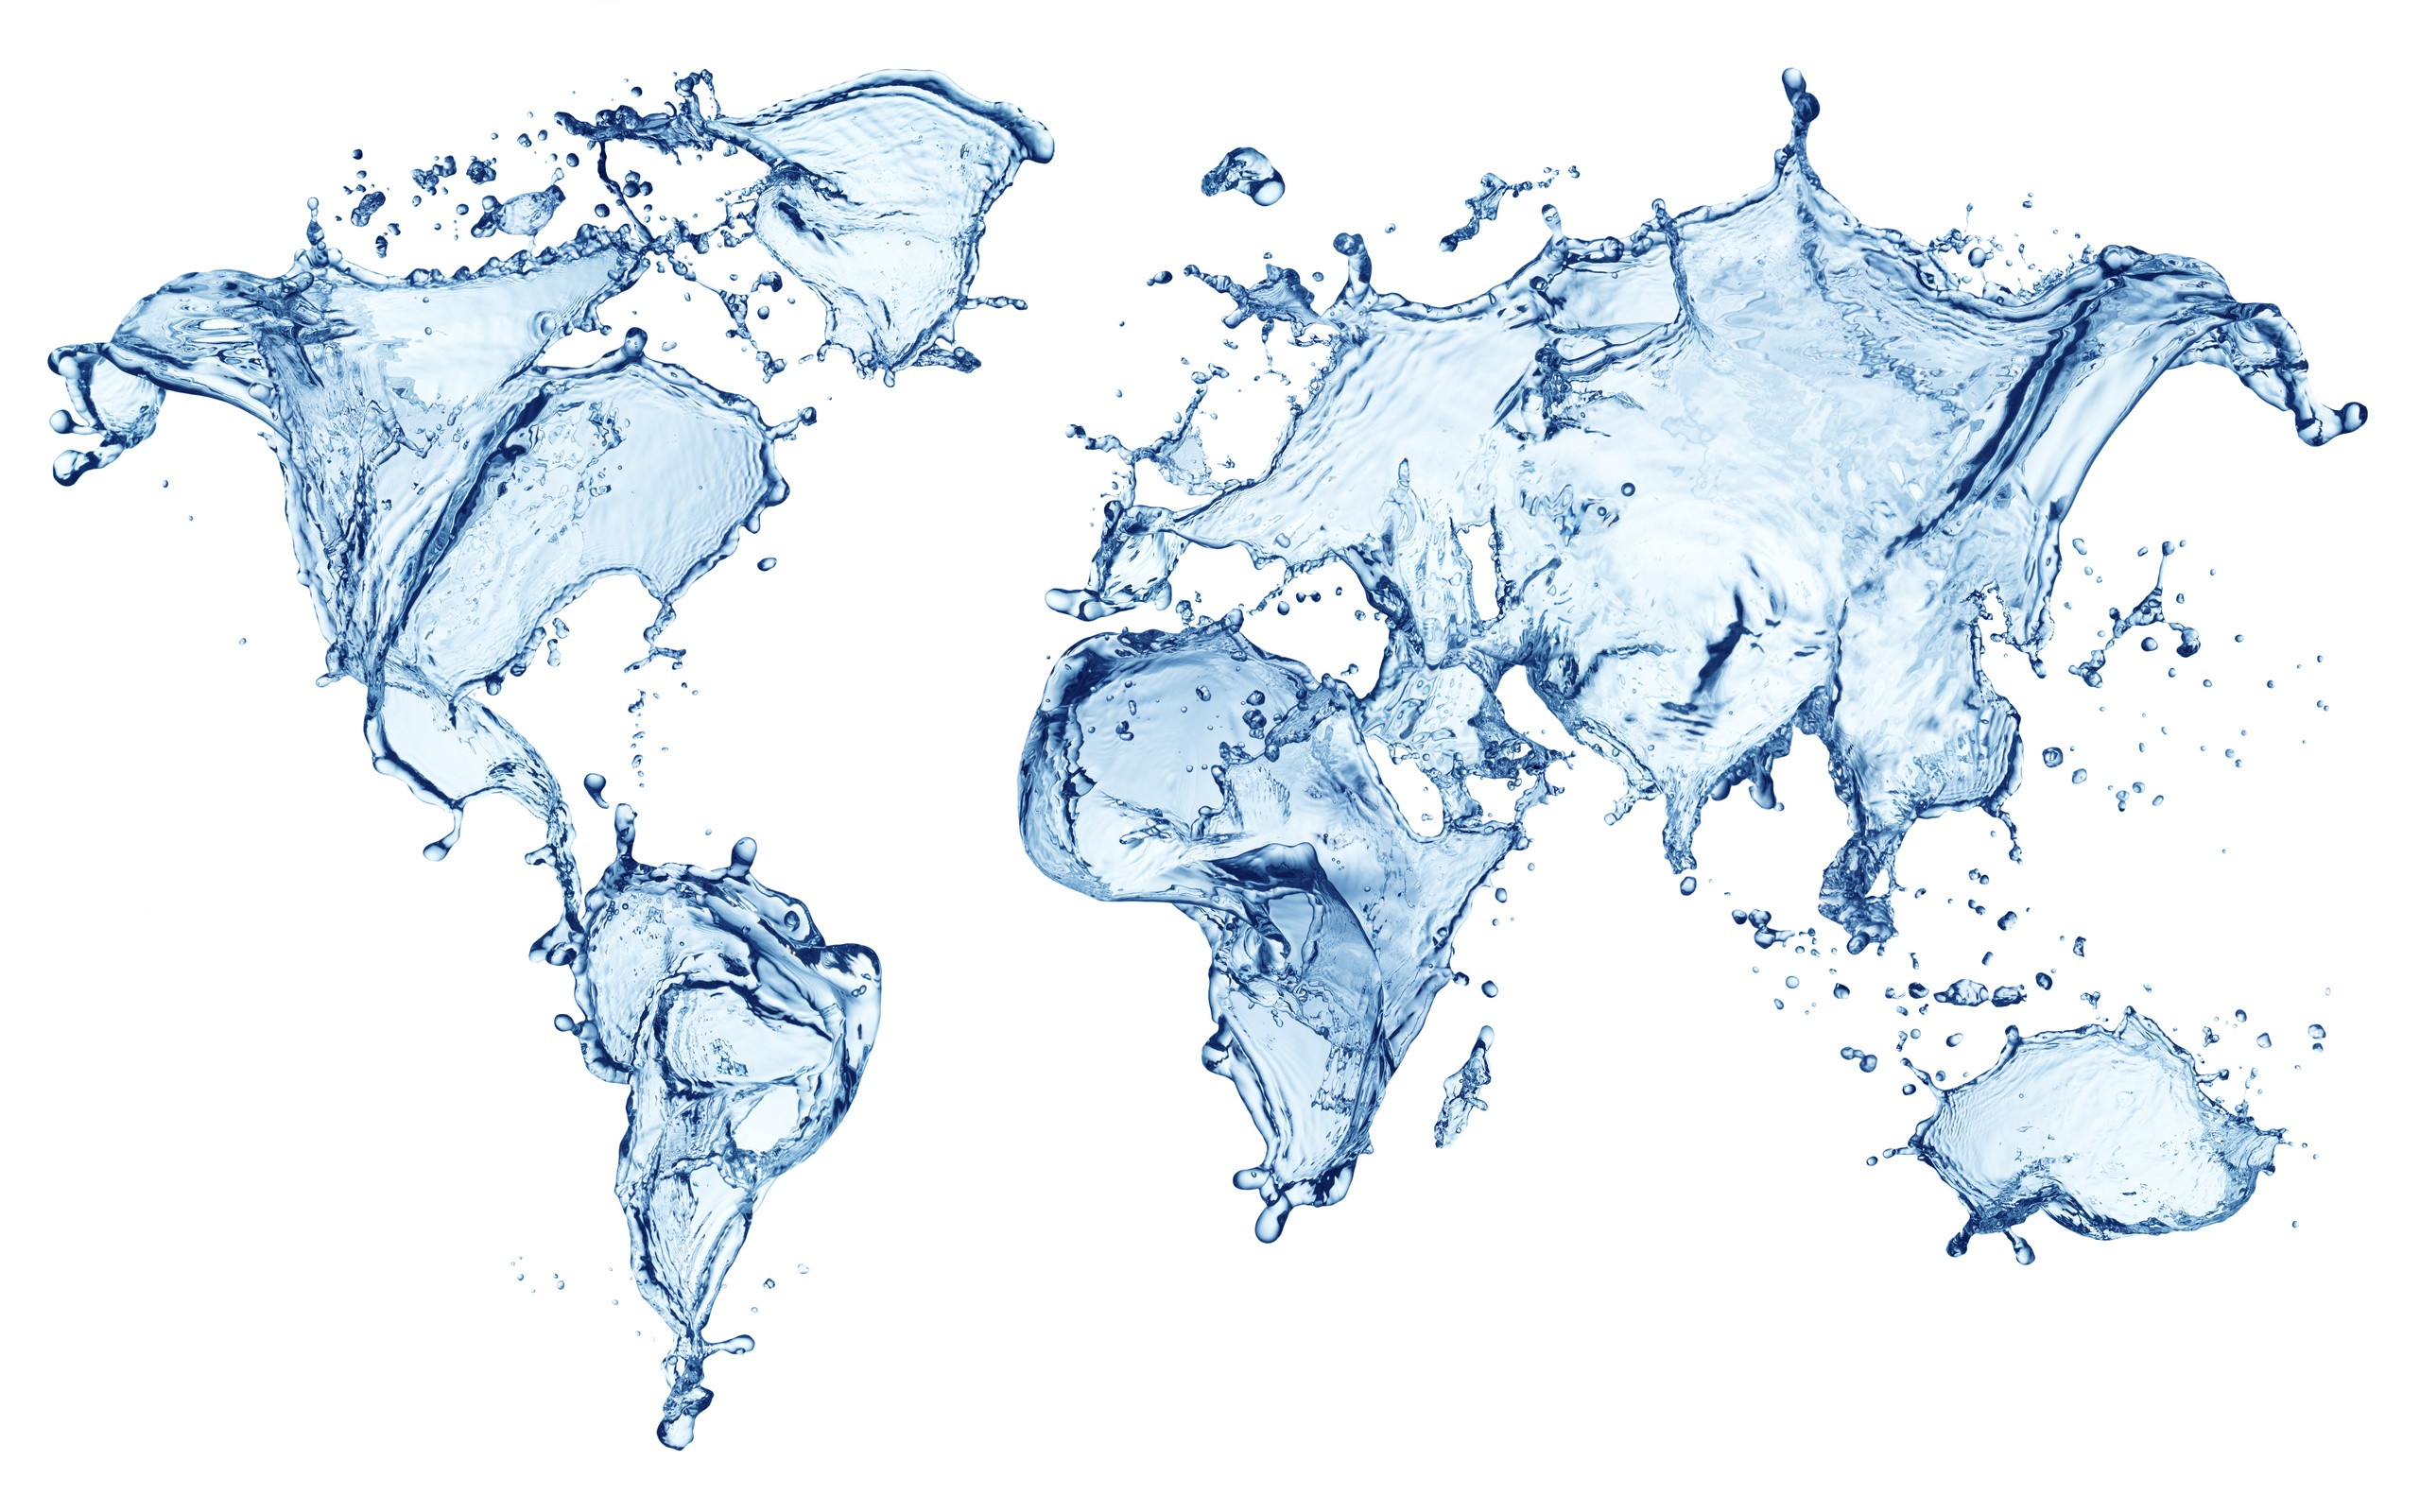 water, Abstract, Maps, World, Map Wallpaper